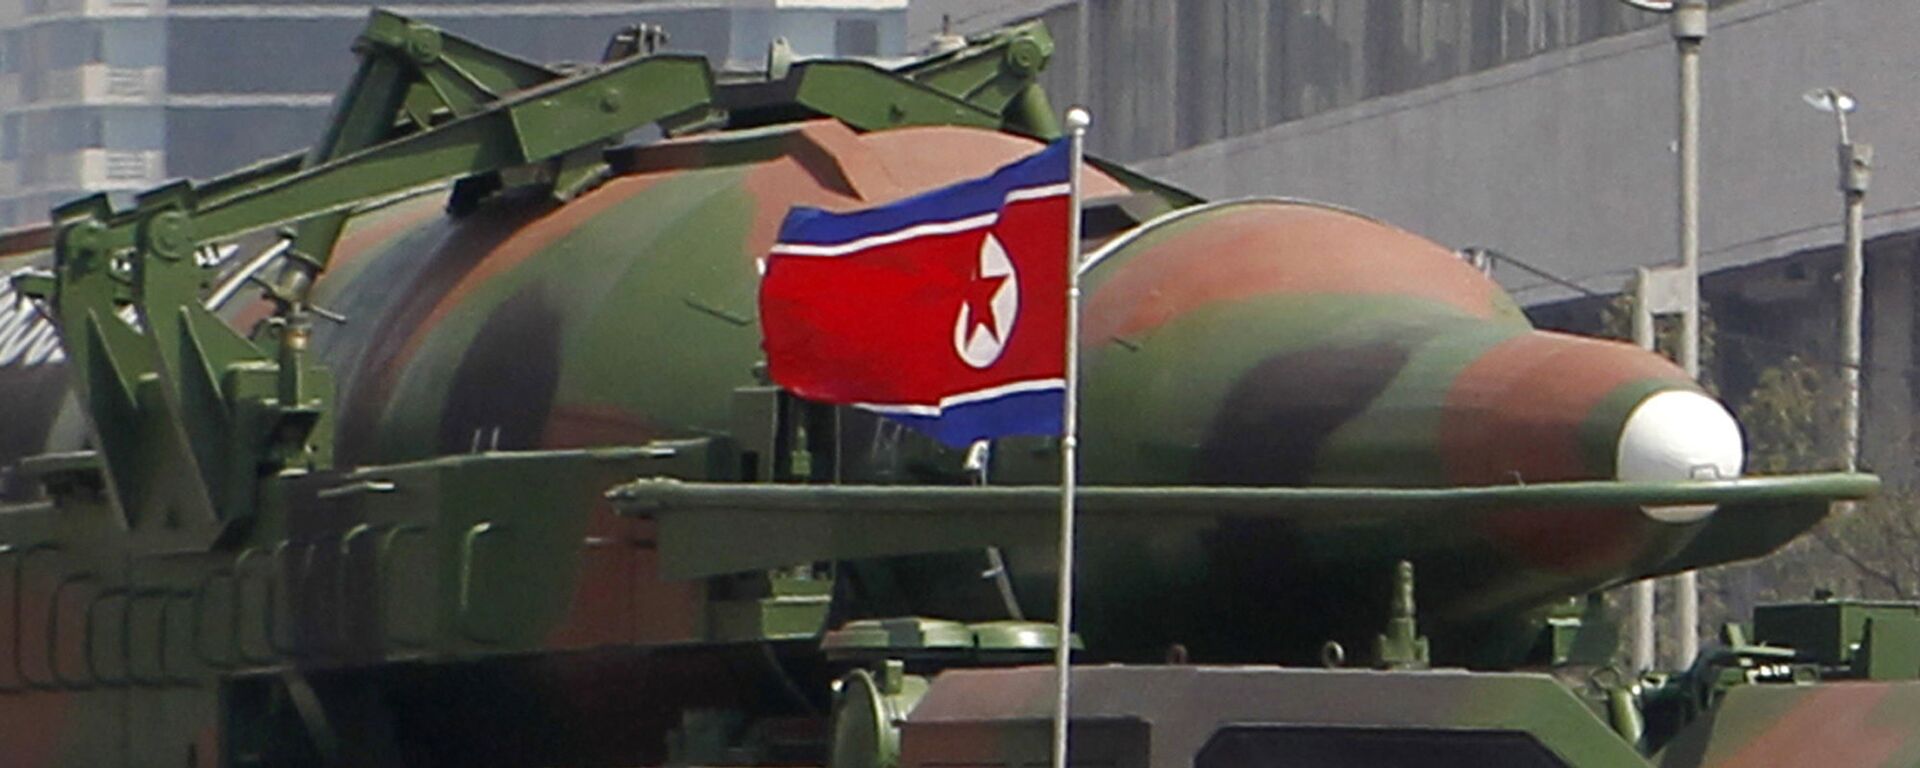 File photo, what appears to be a new missile is carried during a mass military parade at the Kim Il Sung Square in Pyongyang, North Korea, to celebrate the 100th anniversary of the country's founding father Kim Il Sung.  - Sputnik Việt Nam, 1920, 05.06.2022